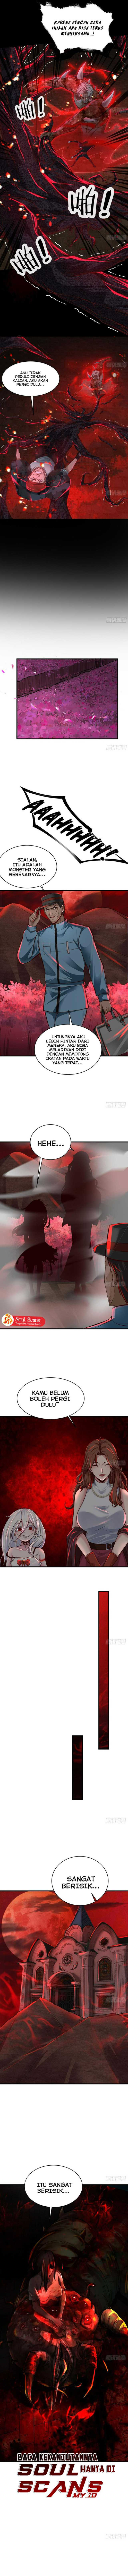 Since The Red Moon Appeared (Hongyue Start) Chapter 69 - 67